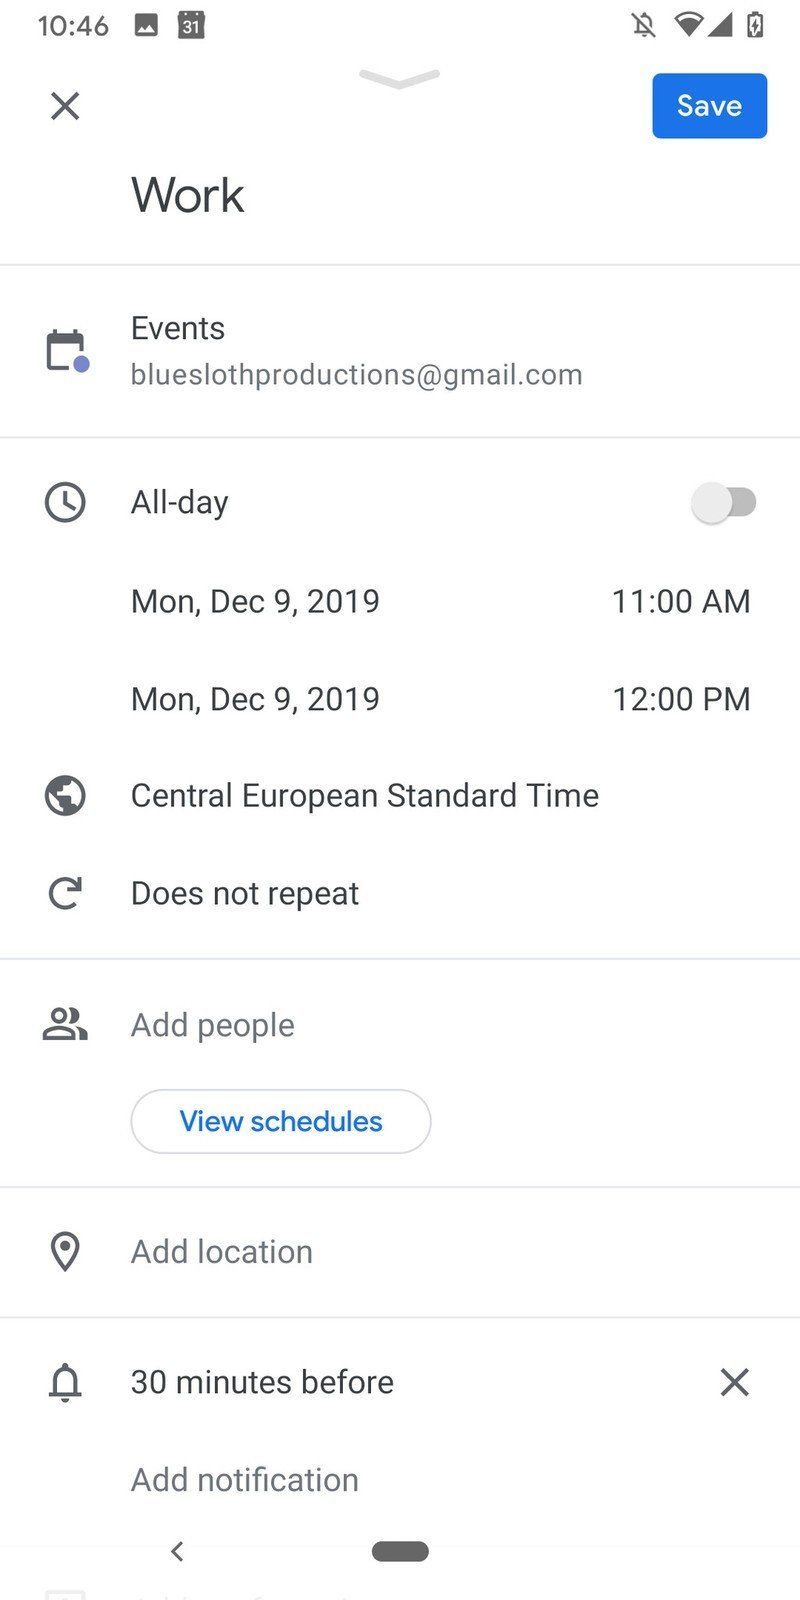 Google Calendar adds the ability to move events between calendars